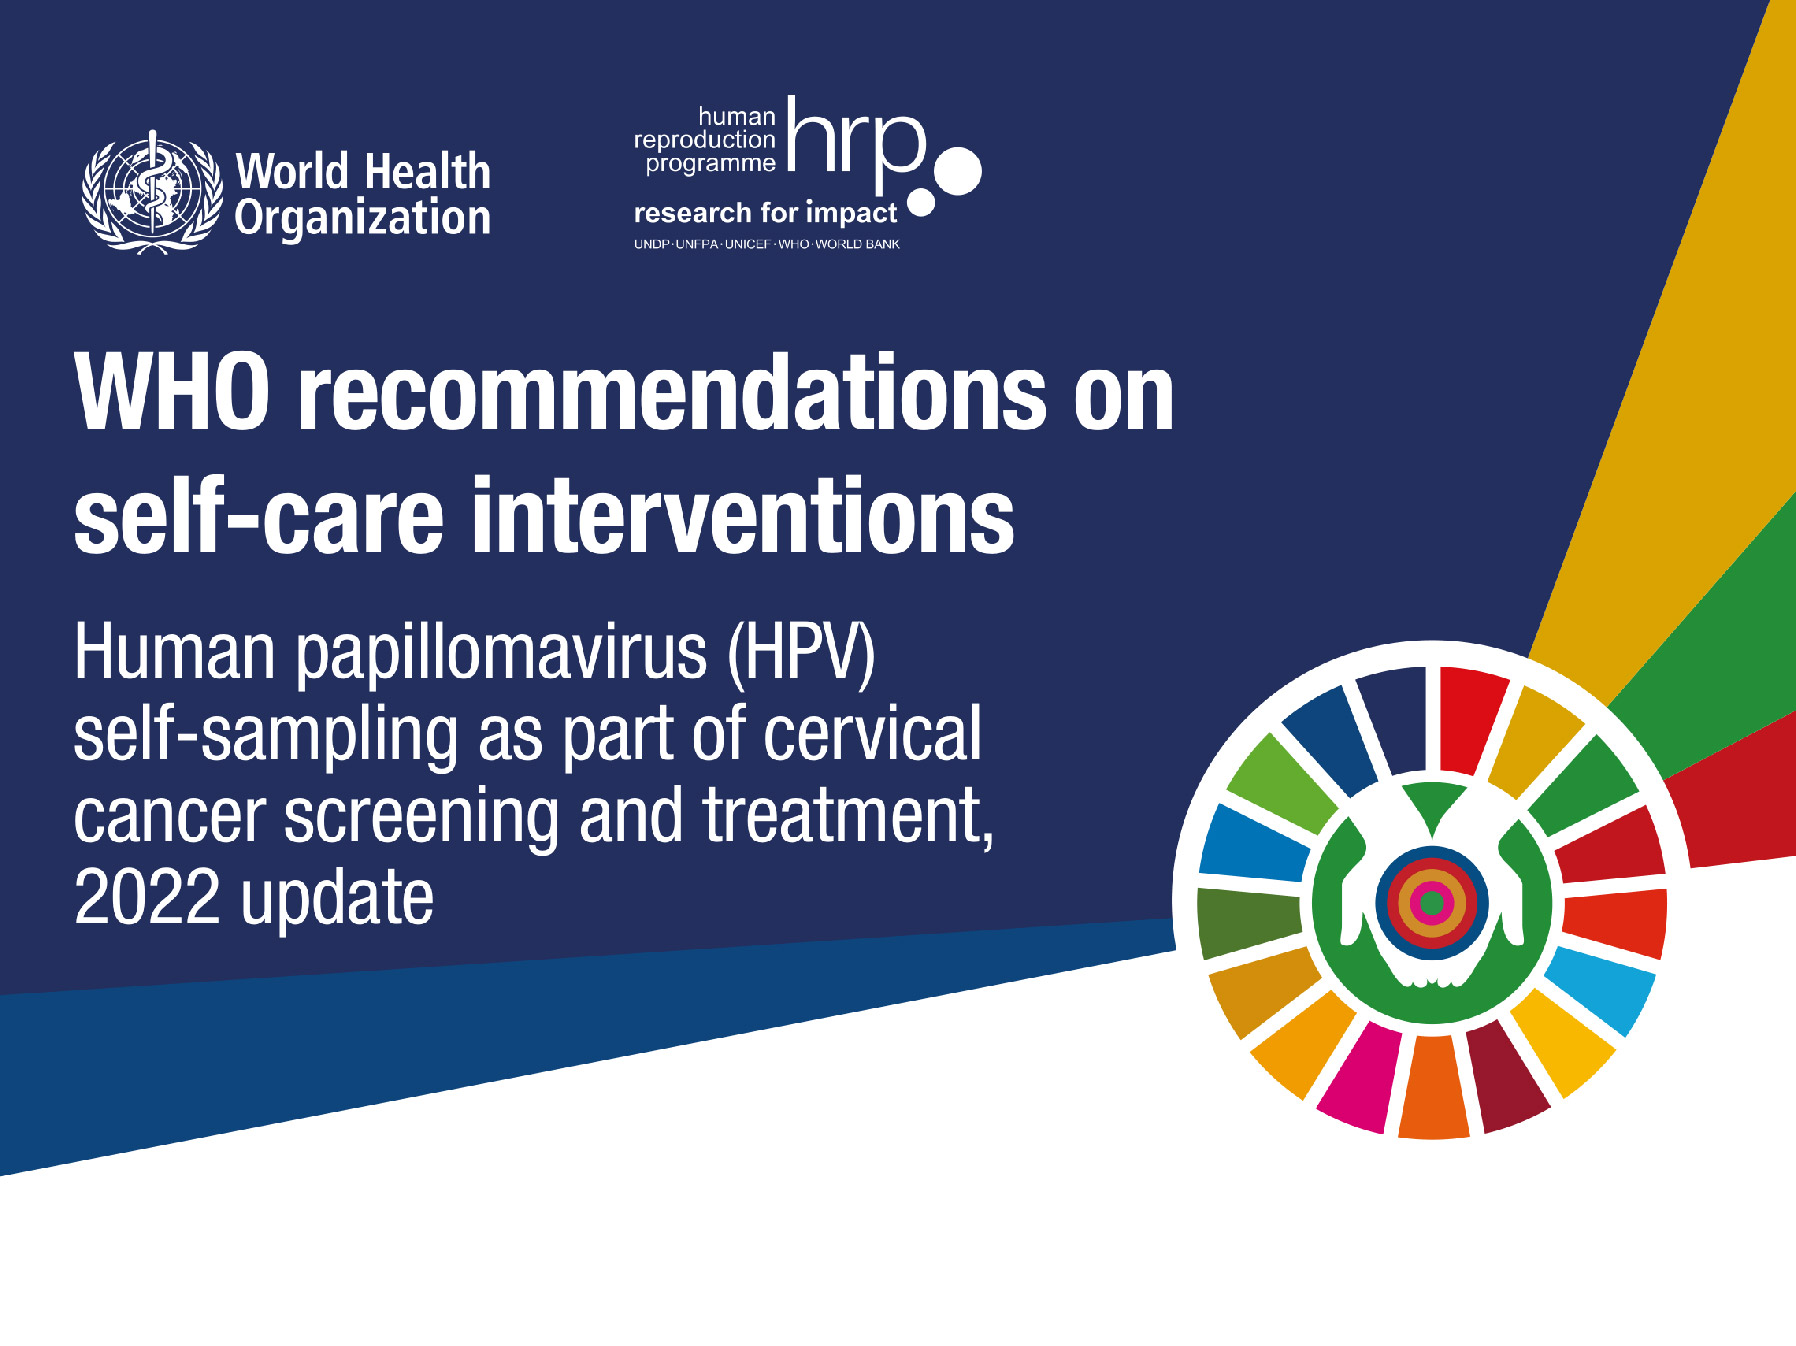 WHO’s guidelines recommend screening with HPV DNA as the primary test  &  Self-sampling is another option that is suggested by WHO